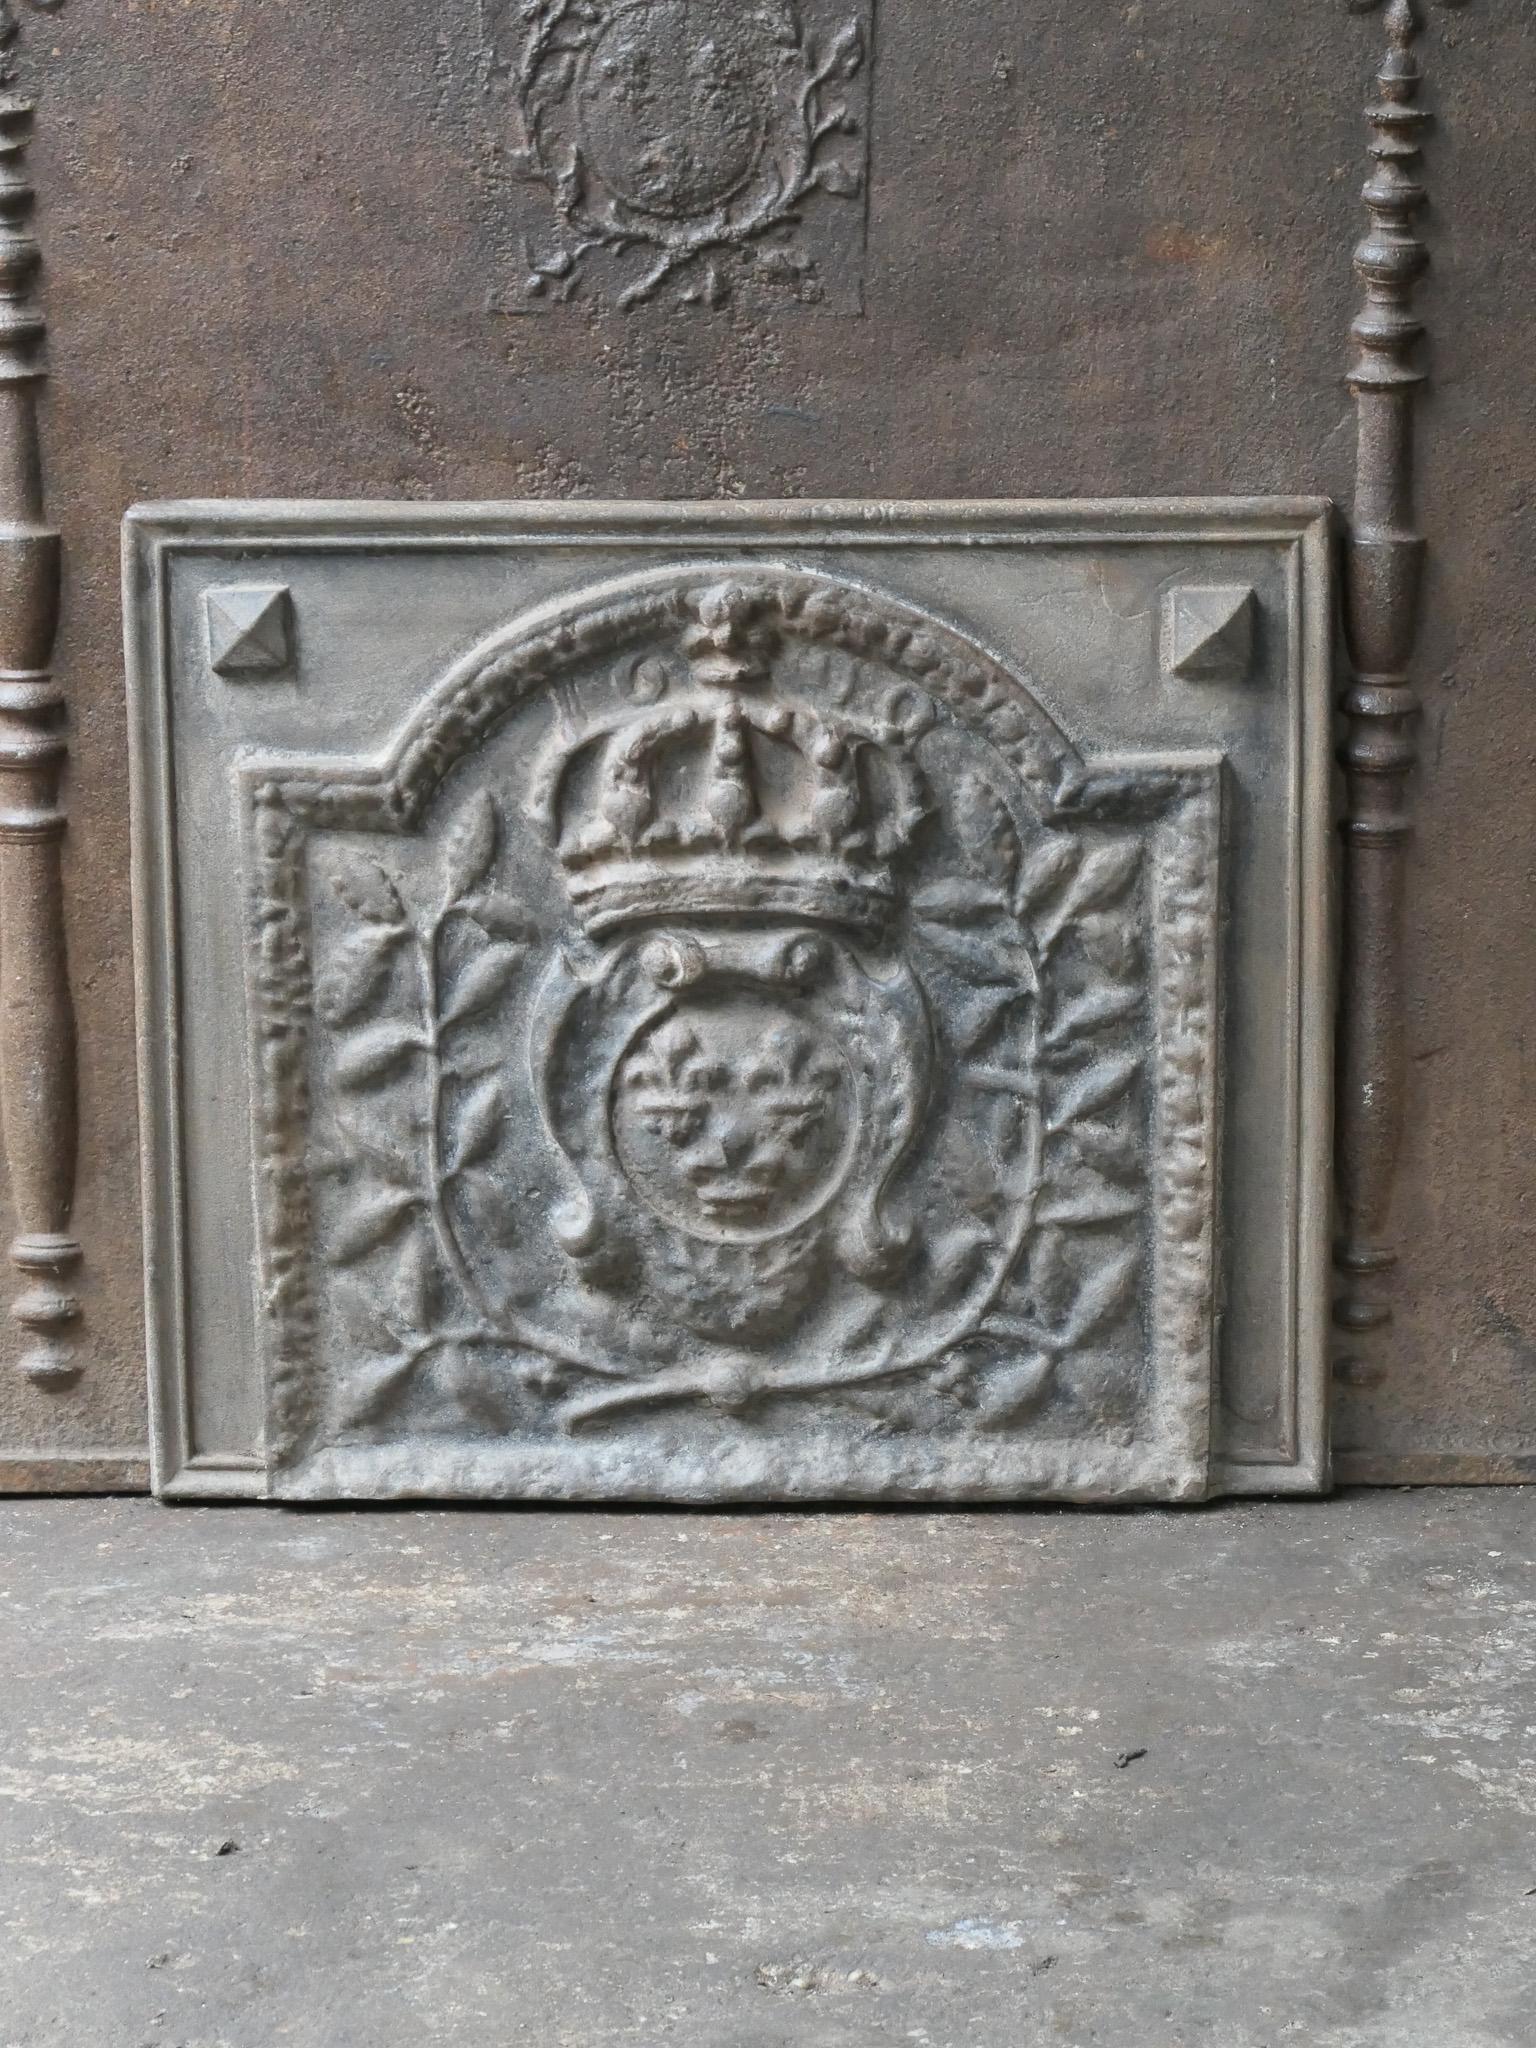 20th century French Louis XV style fireback with the Arms of France. A coat of arms of the House of Bourbon, an originally French royal house that became a major dynasty in Europe. The house delivered kings for Spain (Navarra), France, both Sicilies